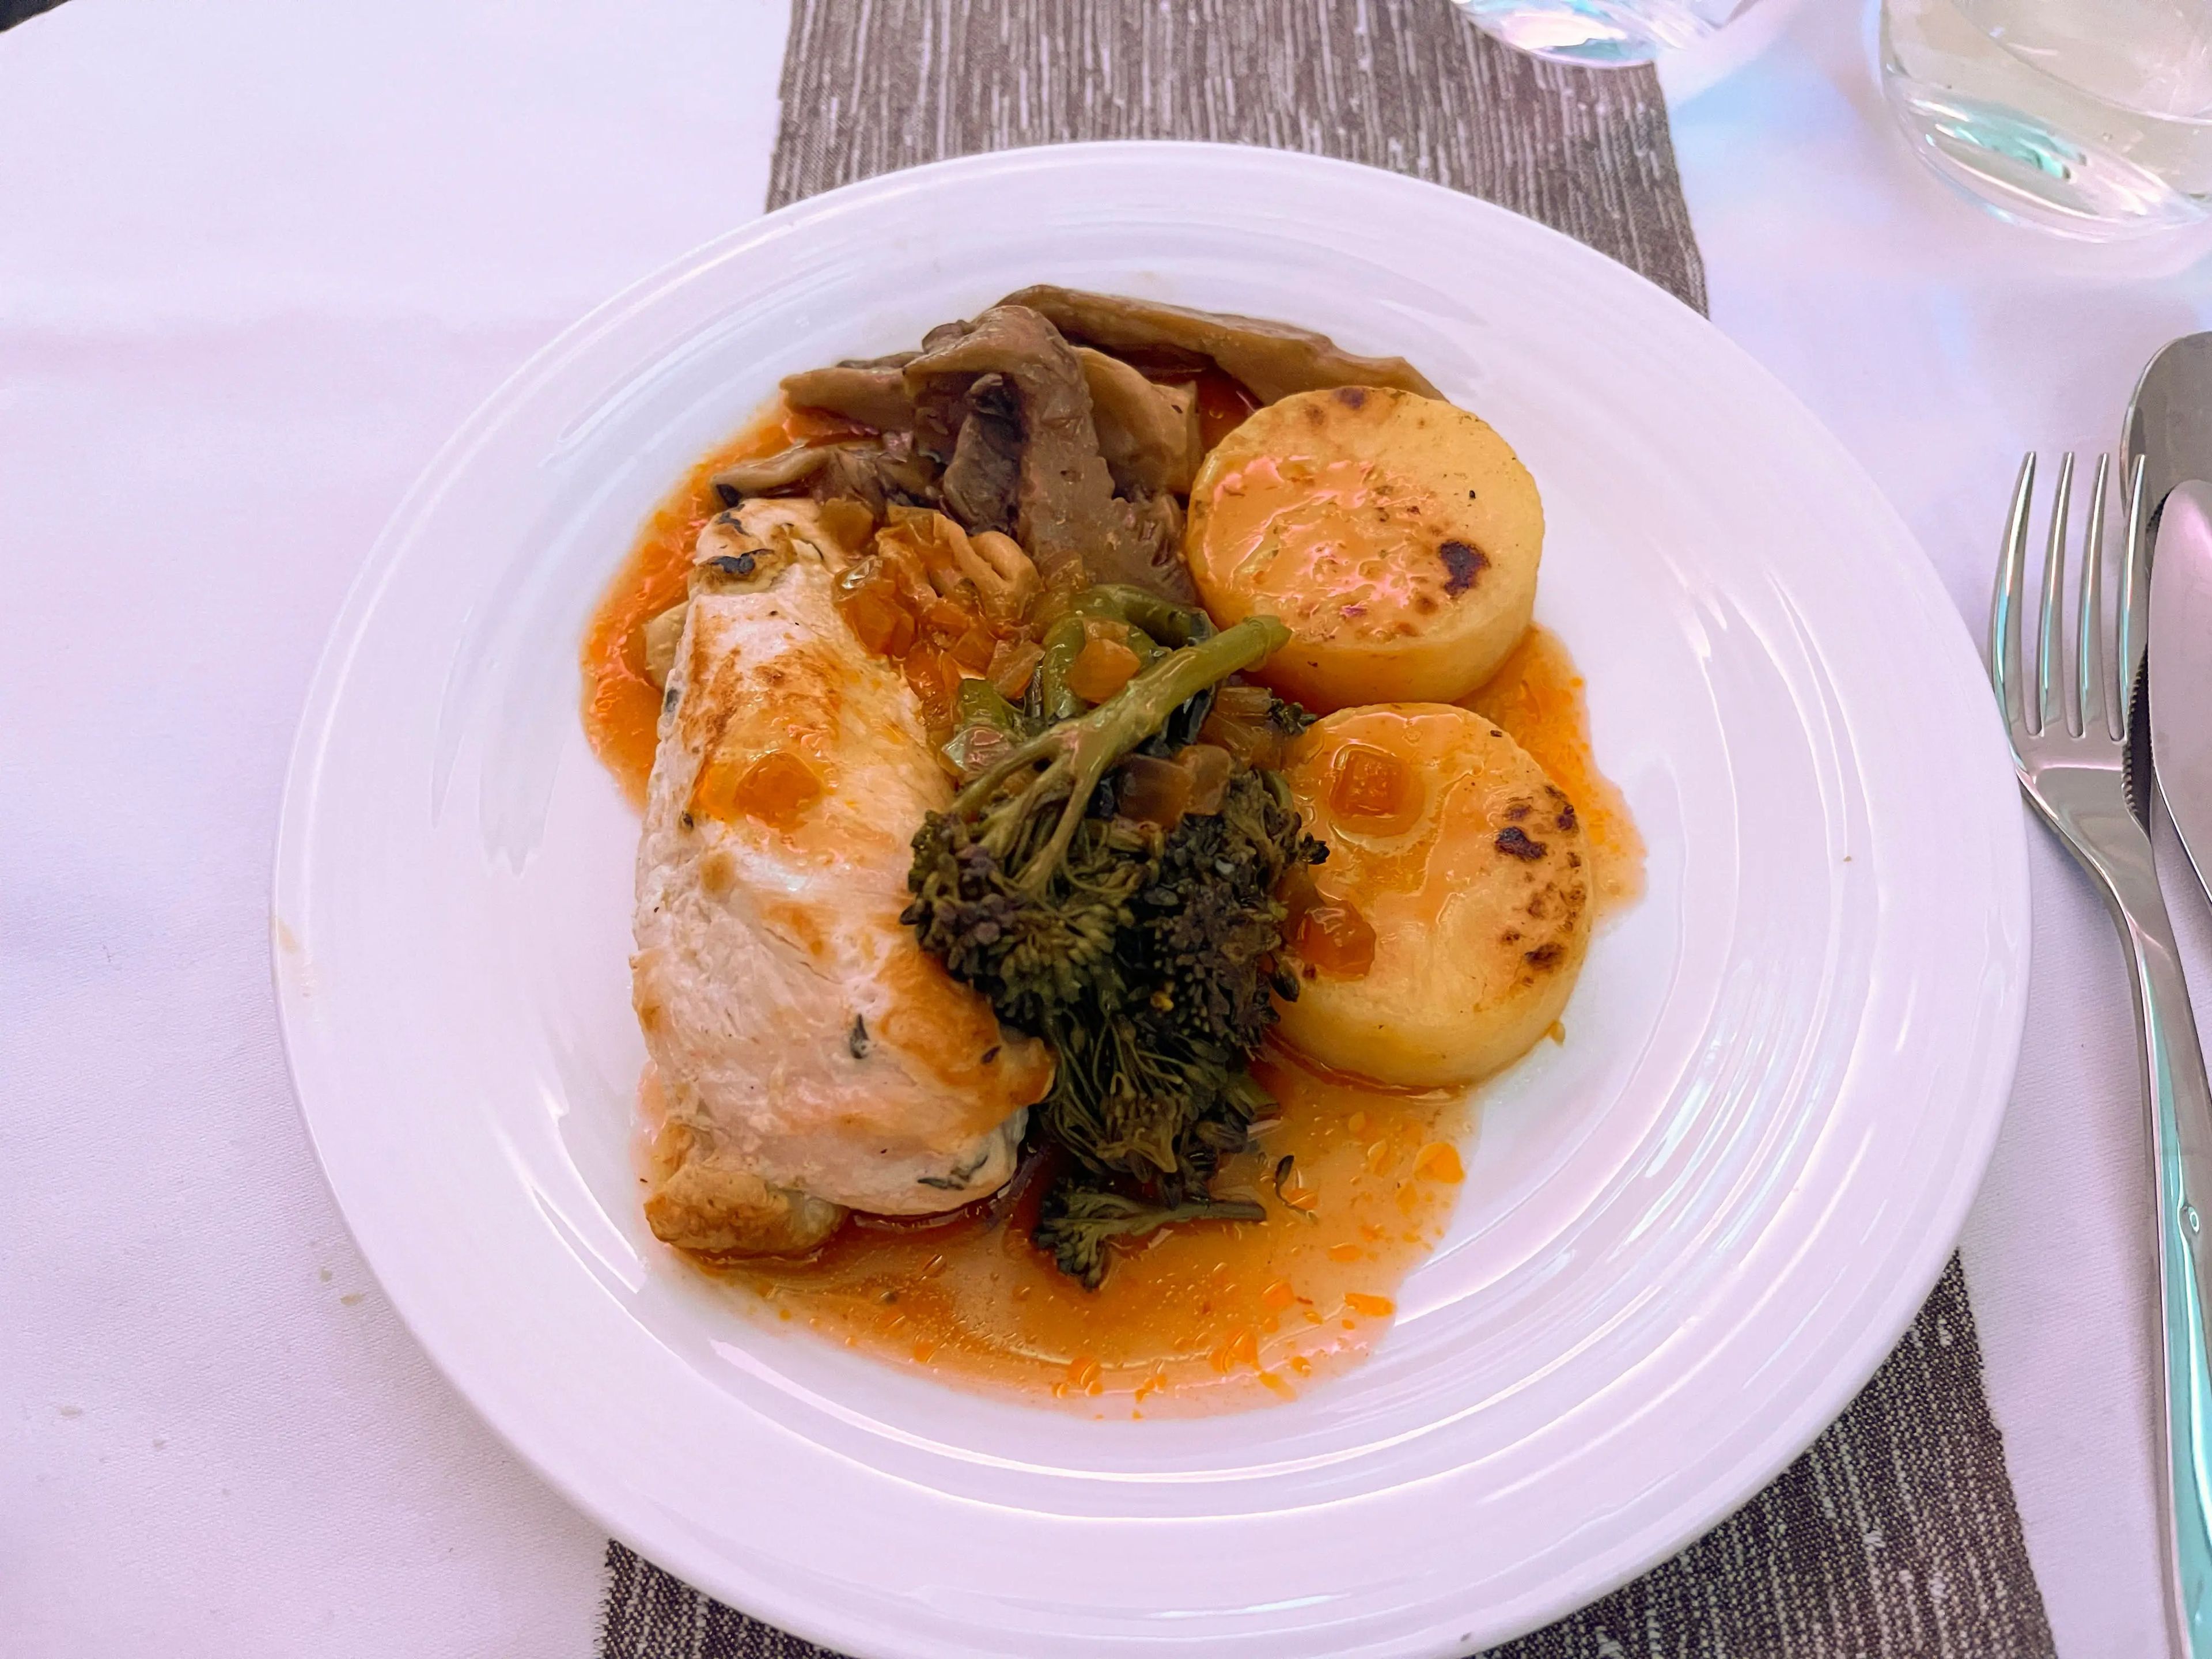 Roasted chicken breast with fondant potatoes, Broccolini, mushrooms, and Madeira sauce on a white plate